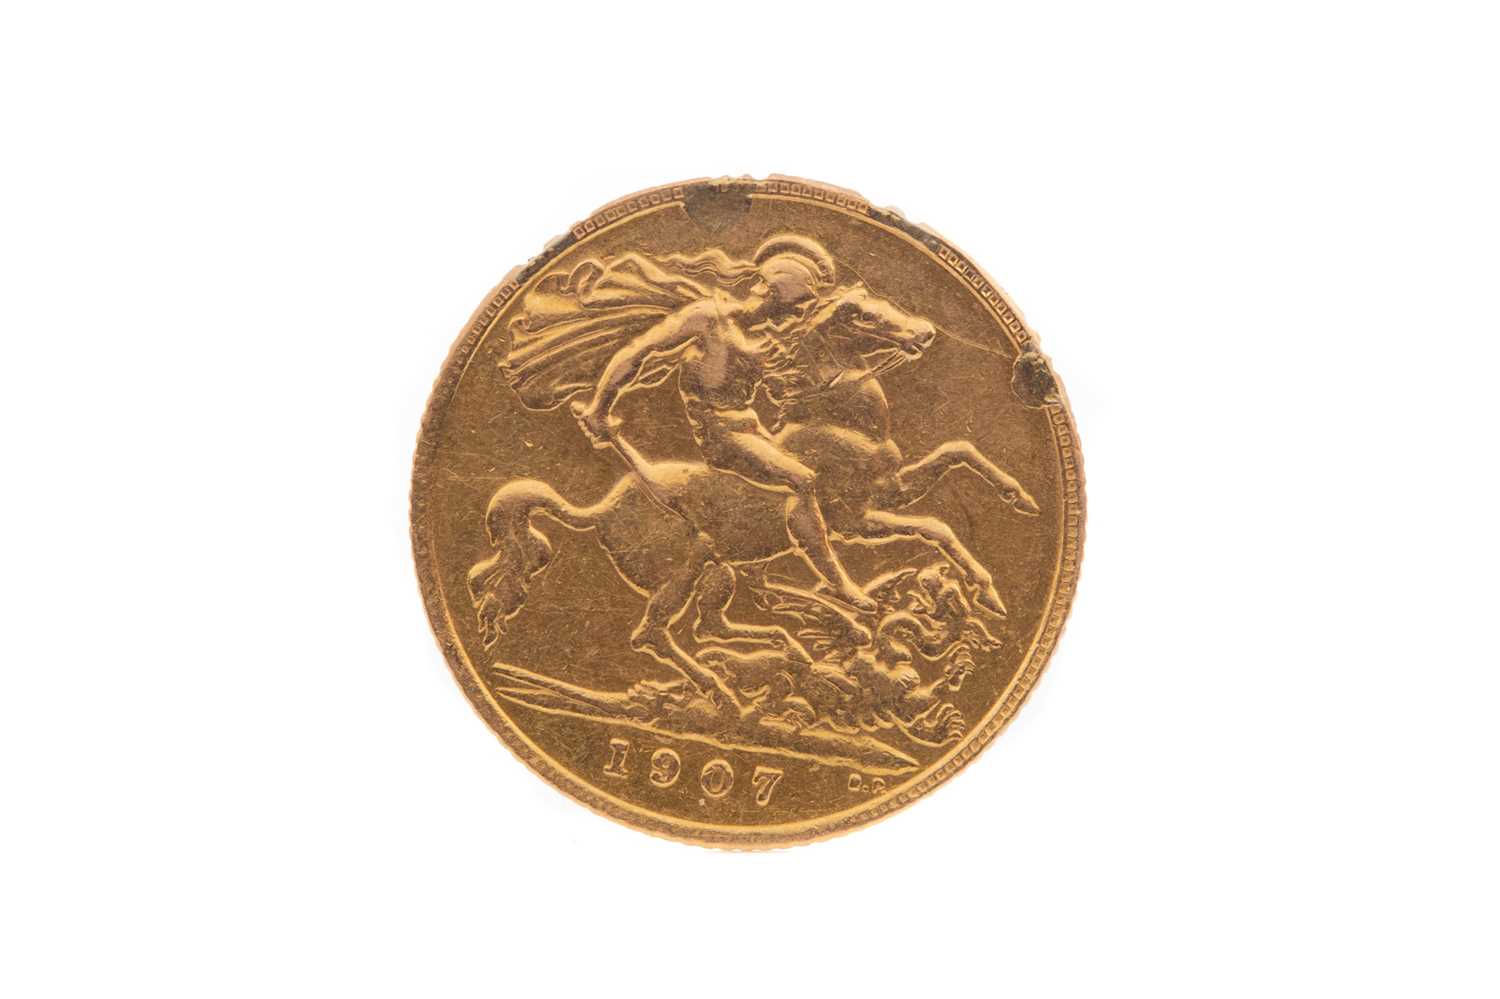 Lot 63 - A GOLD HALF SOVEREIGN DATED 1907